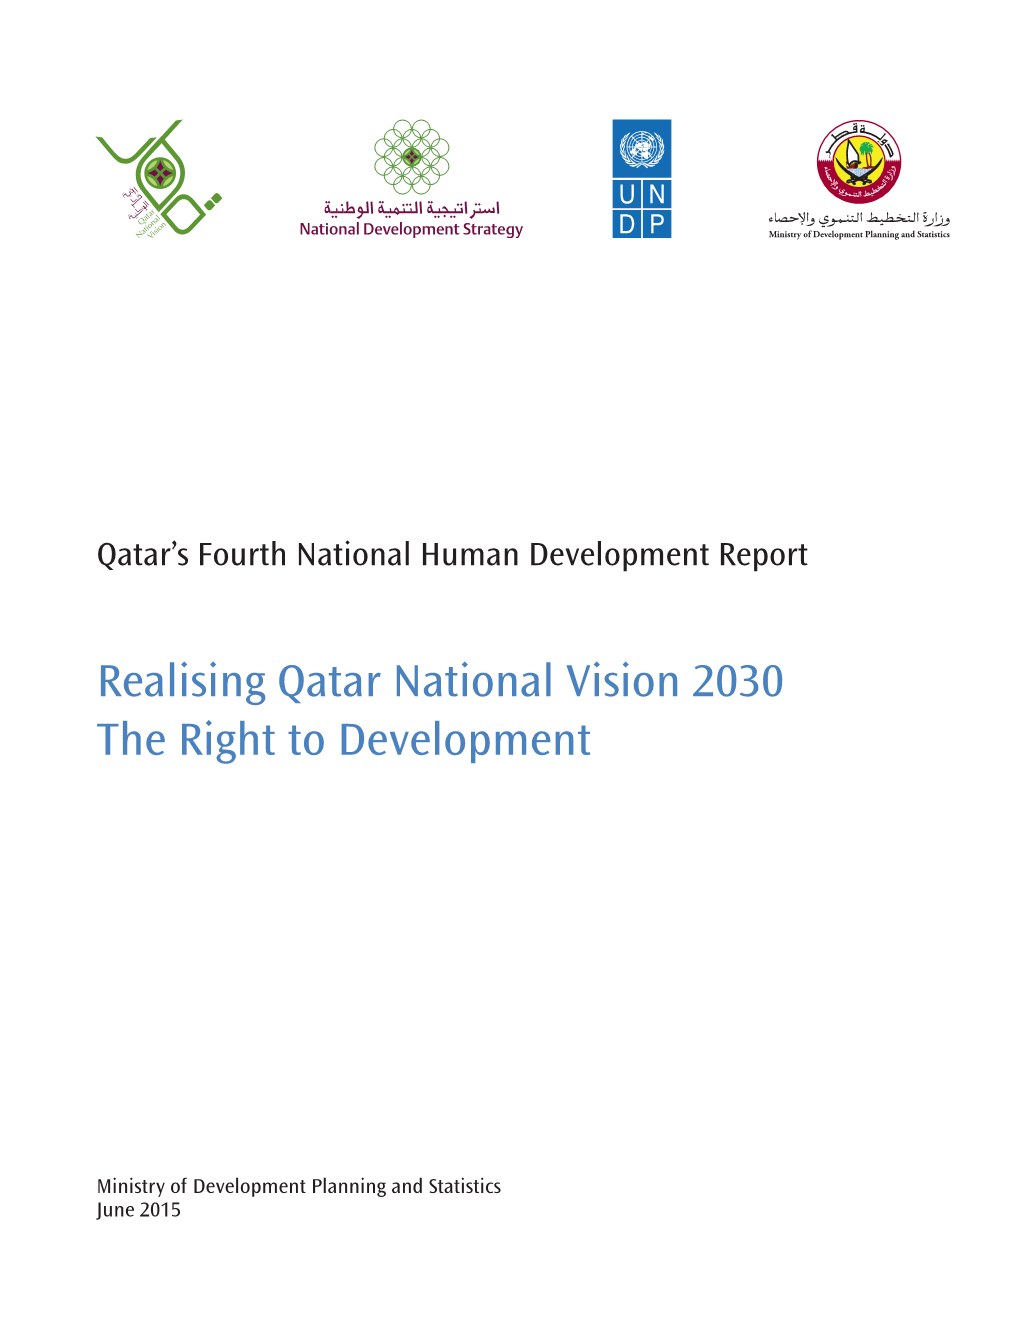 Realising Qatar National Vision 2030 the Right to Development